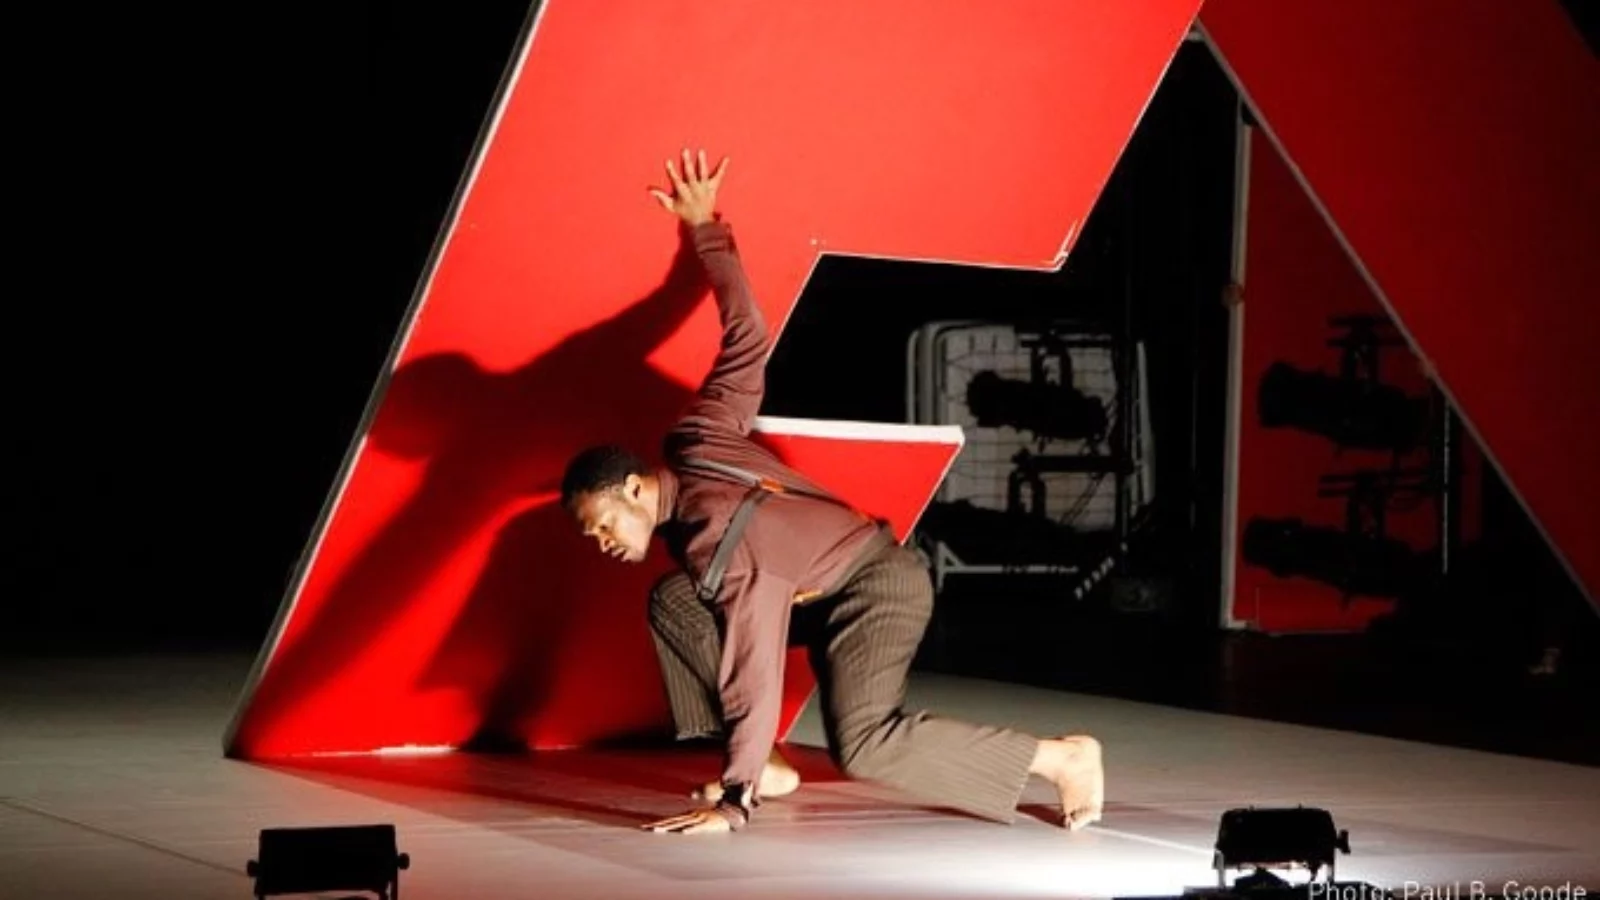 Dancer on a stage kneeling next to a giant red letter "E"